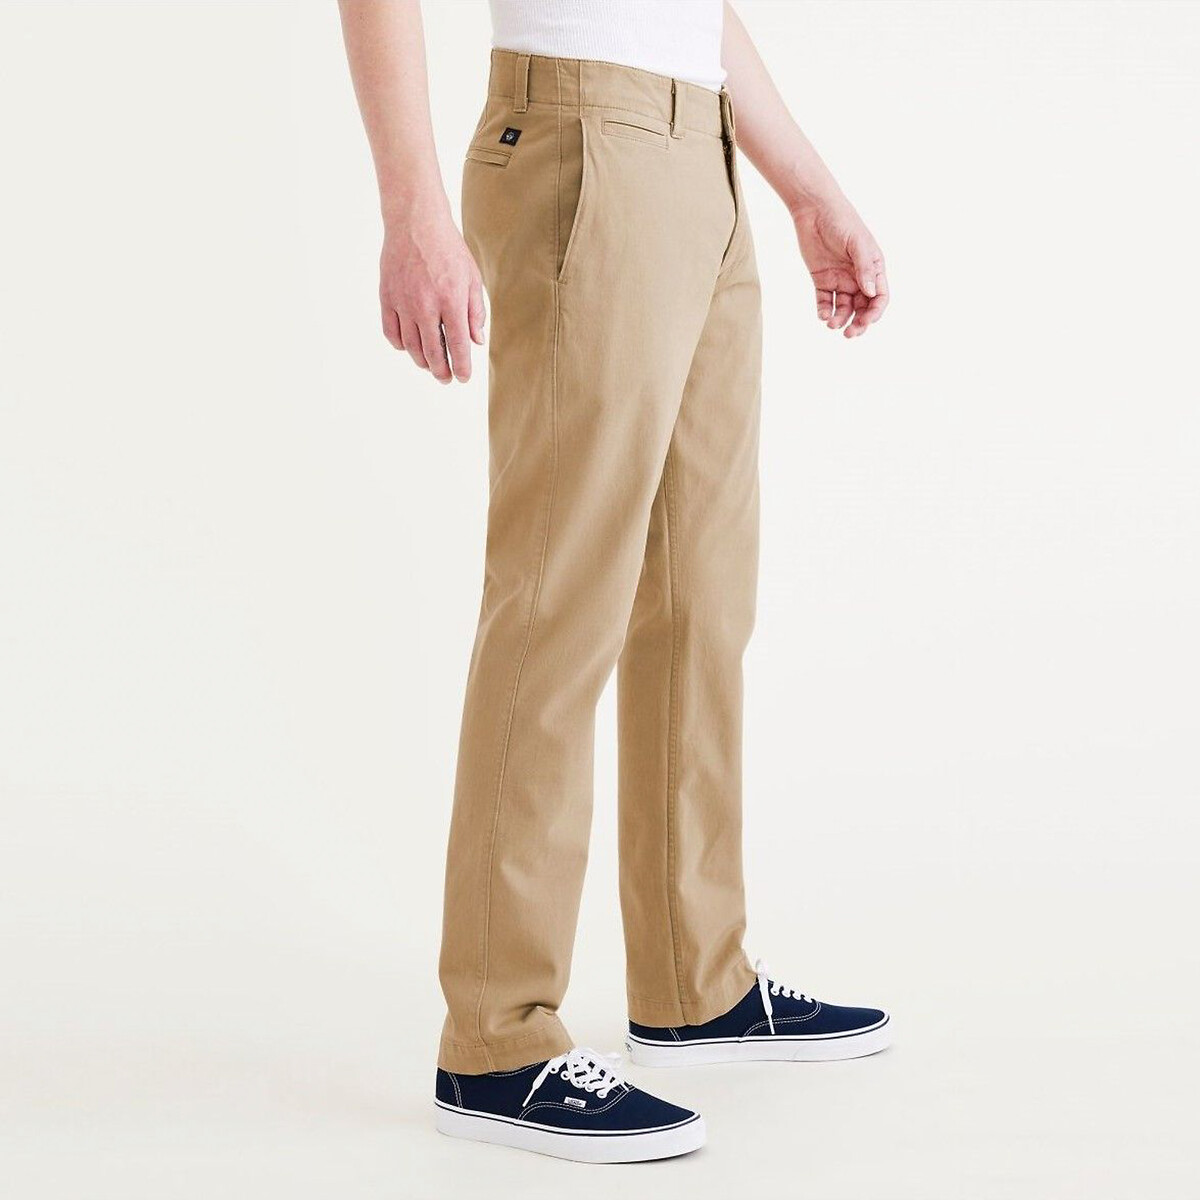 Image of California Khaki Cotton Trousers in Slim Fit